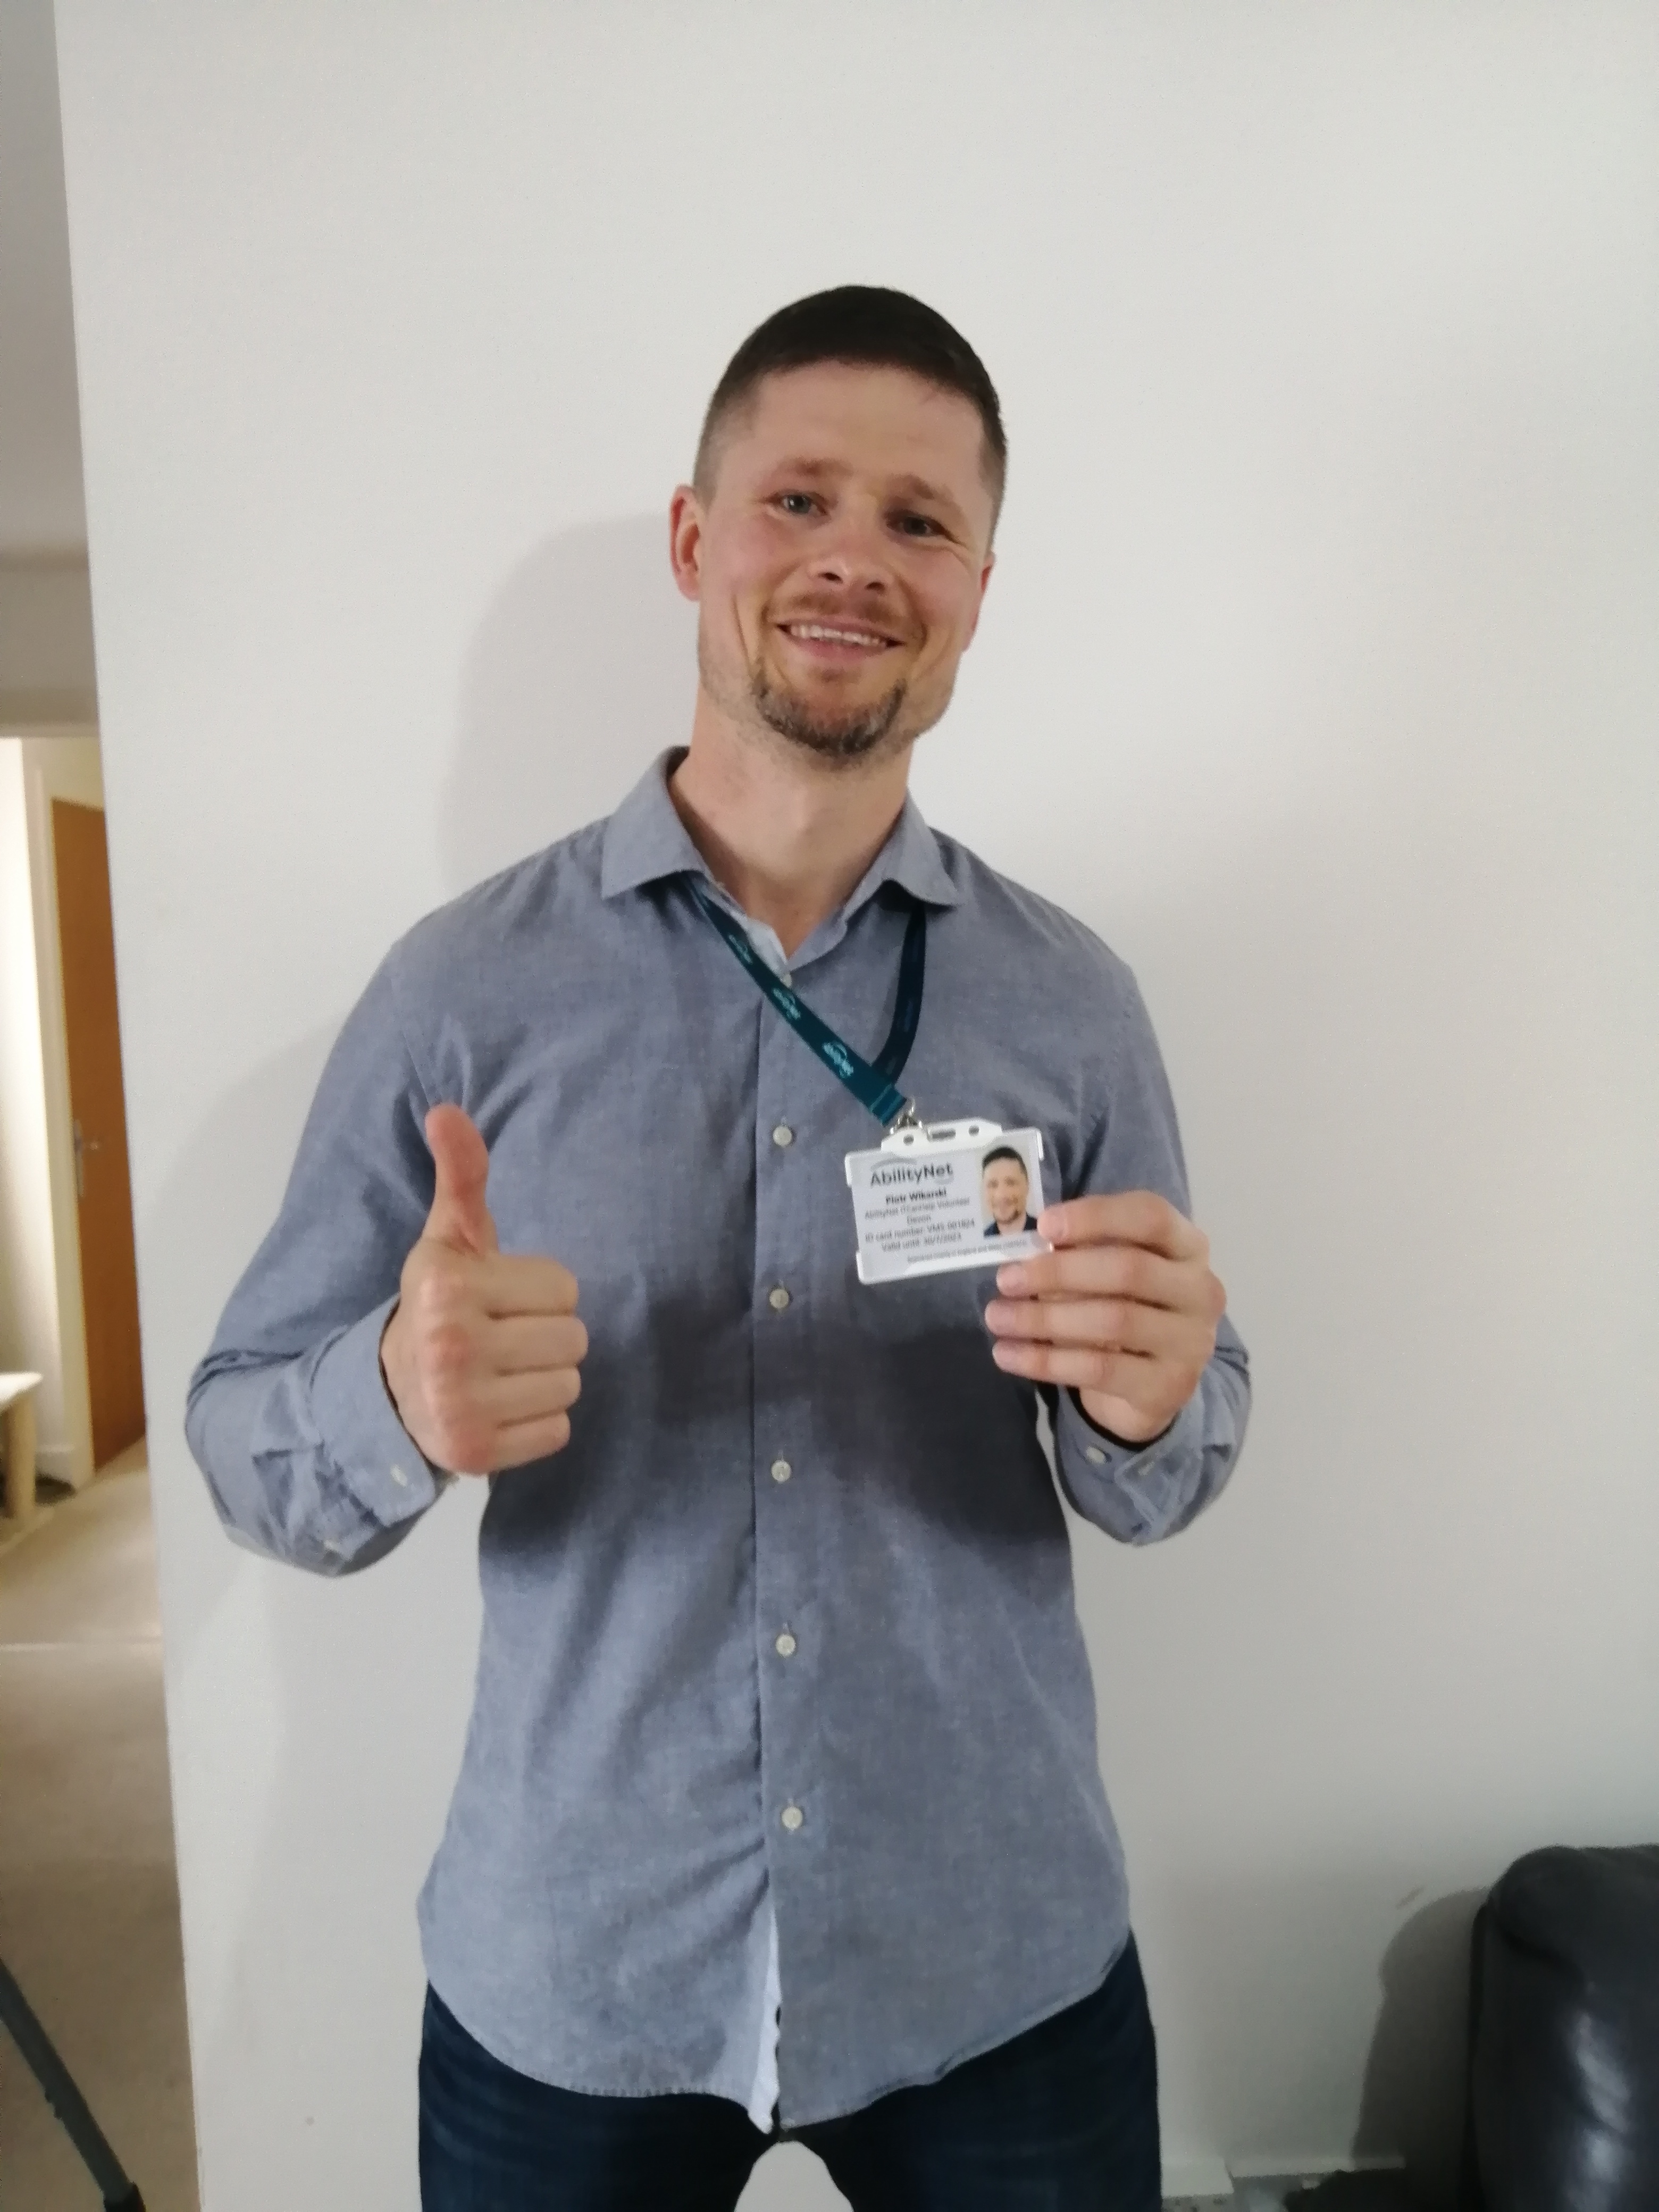 Image of Piotr holding his volunteers badge and giving camera a thumbs up. 